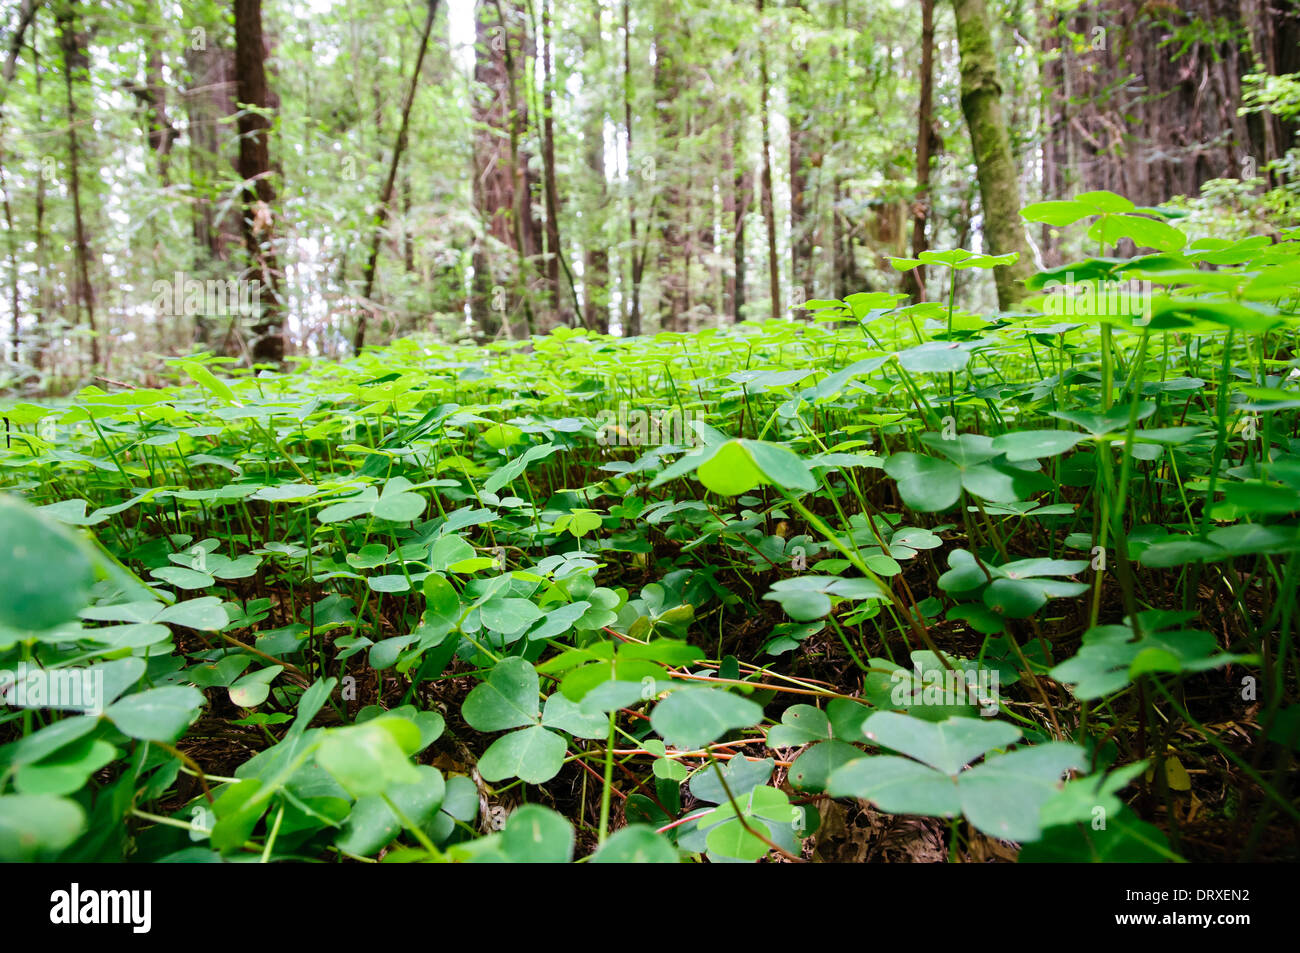 Wood Sorrel Ground Cover In Redwood Forest In Northern California Stock Photo Alamy